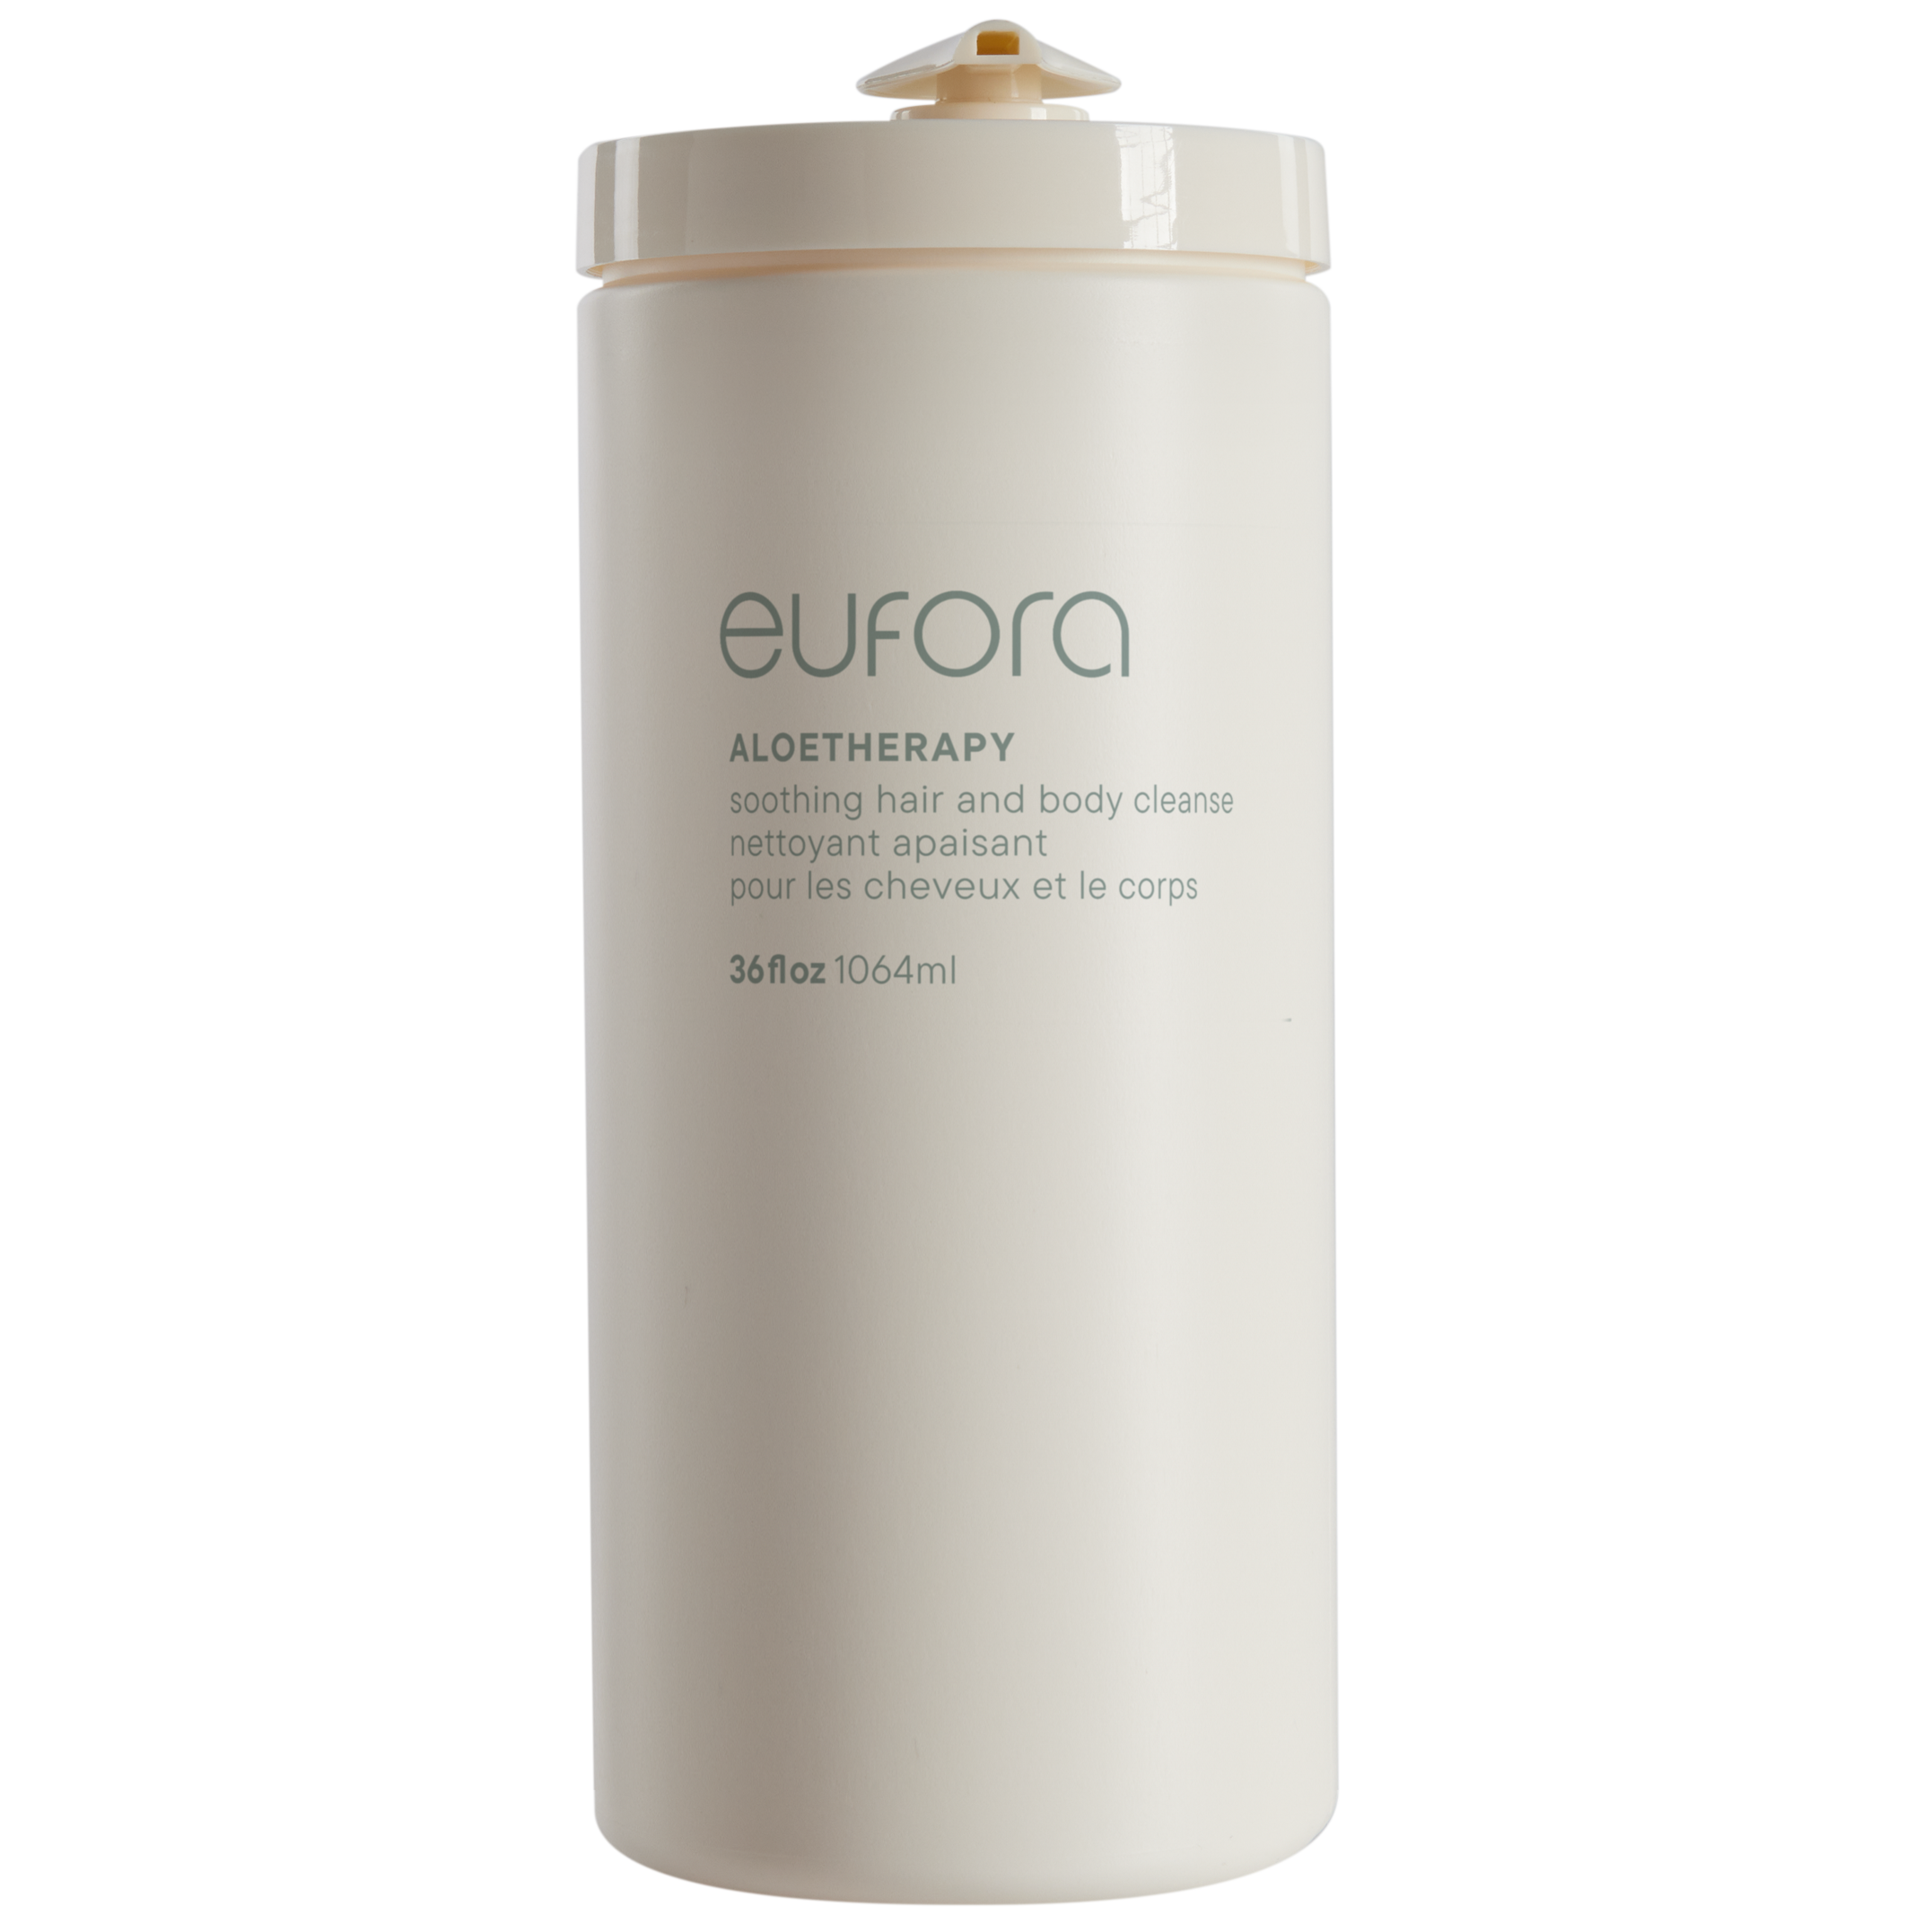 Eufora ALOETHERAPY Soothing Hair & Body Cleanse Shampoo